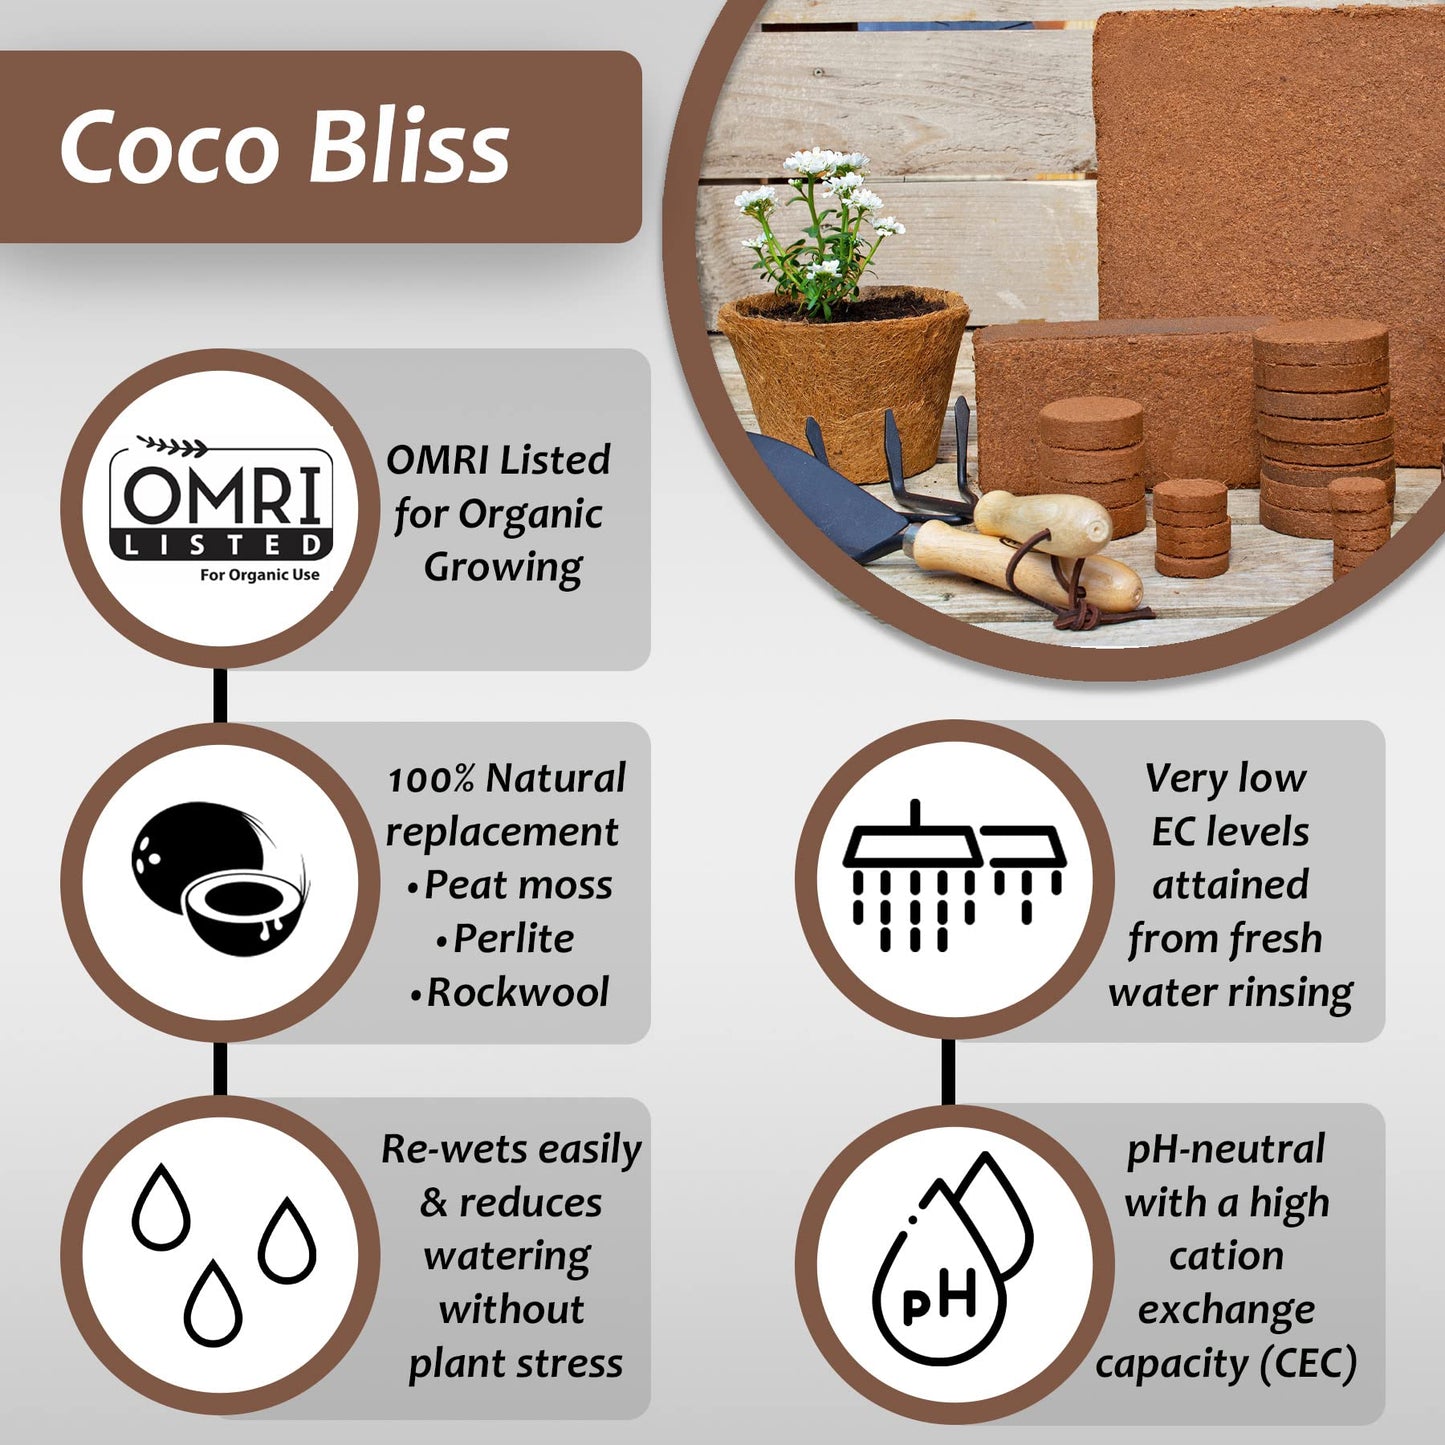 Coco Bliss Coco Coir (10lbs) + Perlite Bliss (24 Qt) - Compressed Coco Coir Pith - Horticultural Perlite - Renewable Coconut Soil for Flowers, Plants, and Gardening - OMRI Listed Soil Amendments